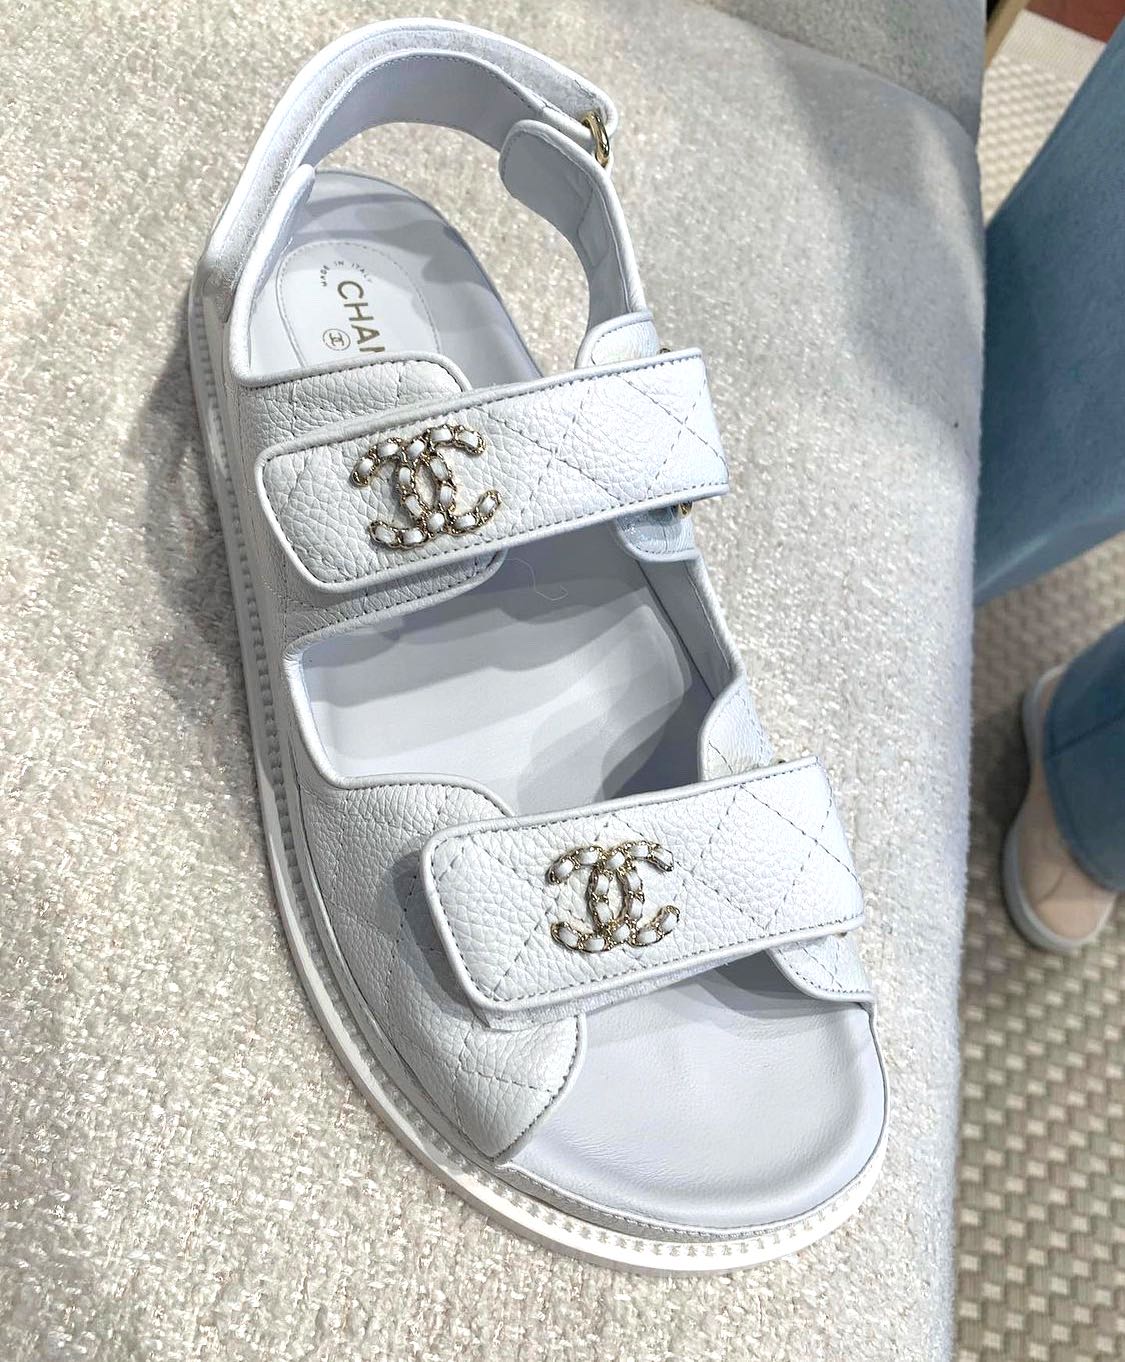 5 Chanel Sandals Our Editors Are Packing For Summer Vacation